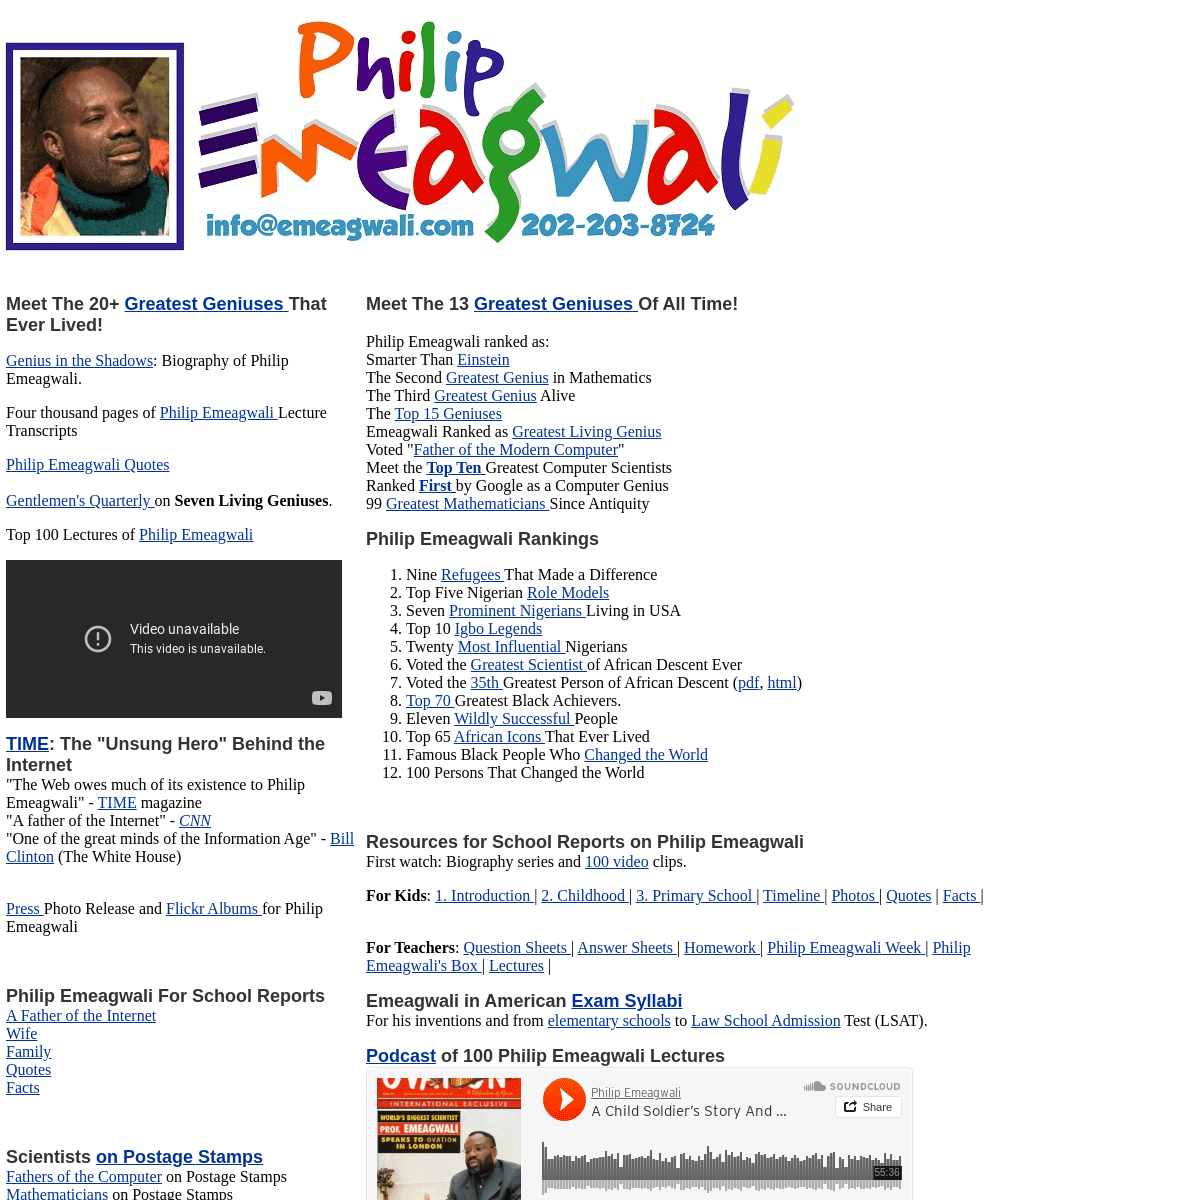 Philip Emeagwali - A Father of the Internet - Supercomputer Biography